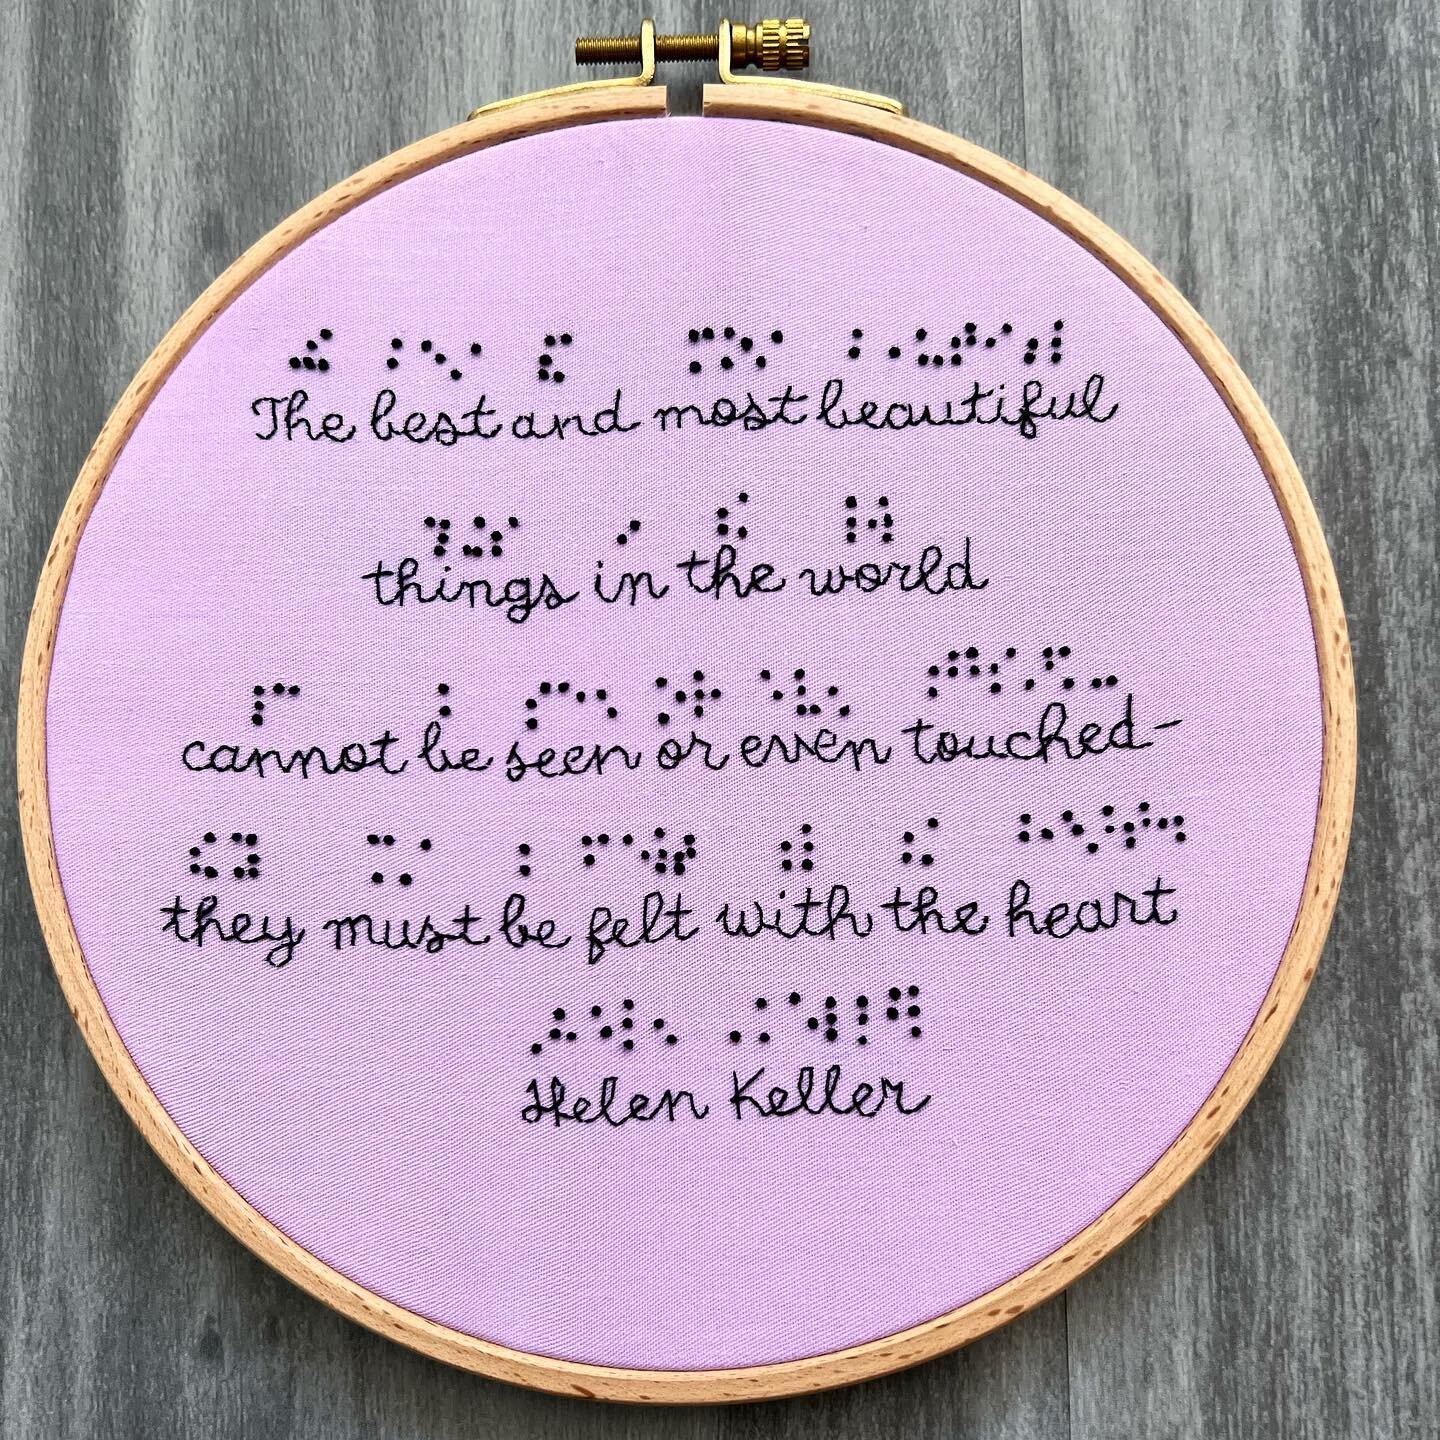 2022 Braille Challenge Finals-

I had the pleasure of collaborating with one of the winners of the 2022 Braille Challenge Finals on this stitch &ndash; the prize for her win. Janna selected the quote and colors. The braille was made using French knot